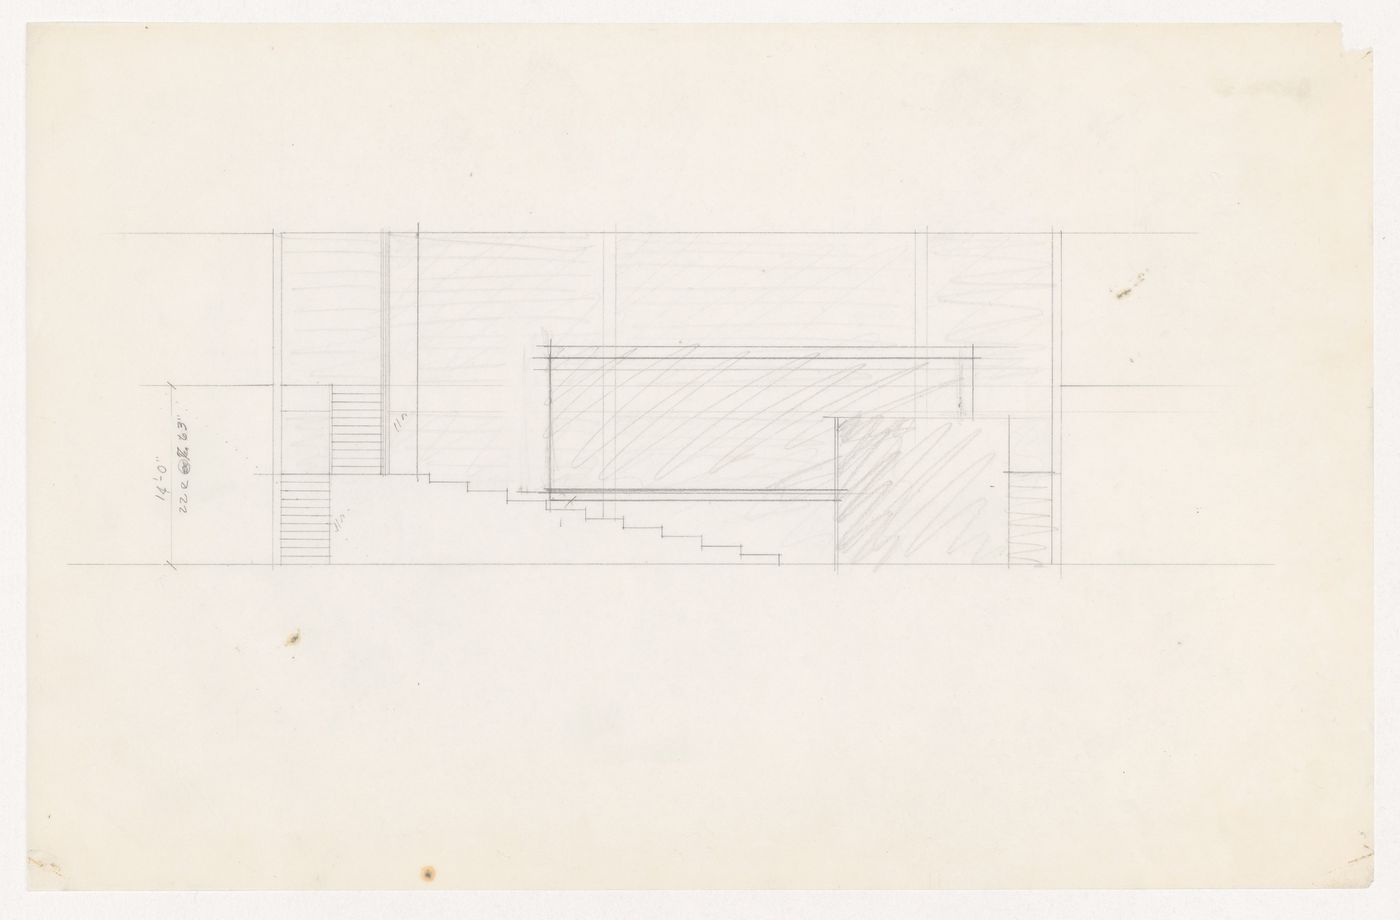 Interior elevation showing stairs for the Metallurgy Building, Illinois Institute of Technology, Chicago